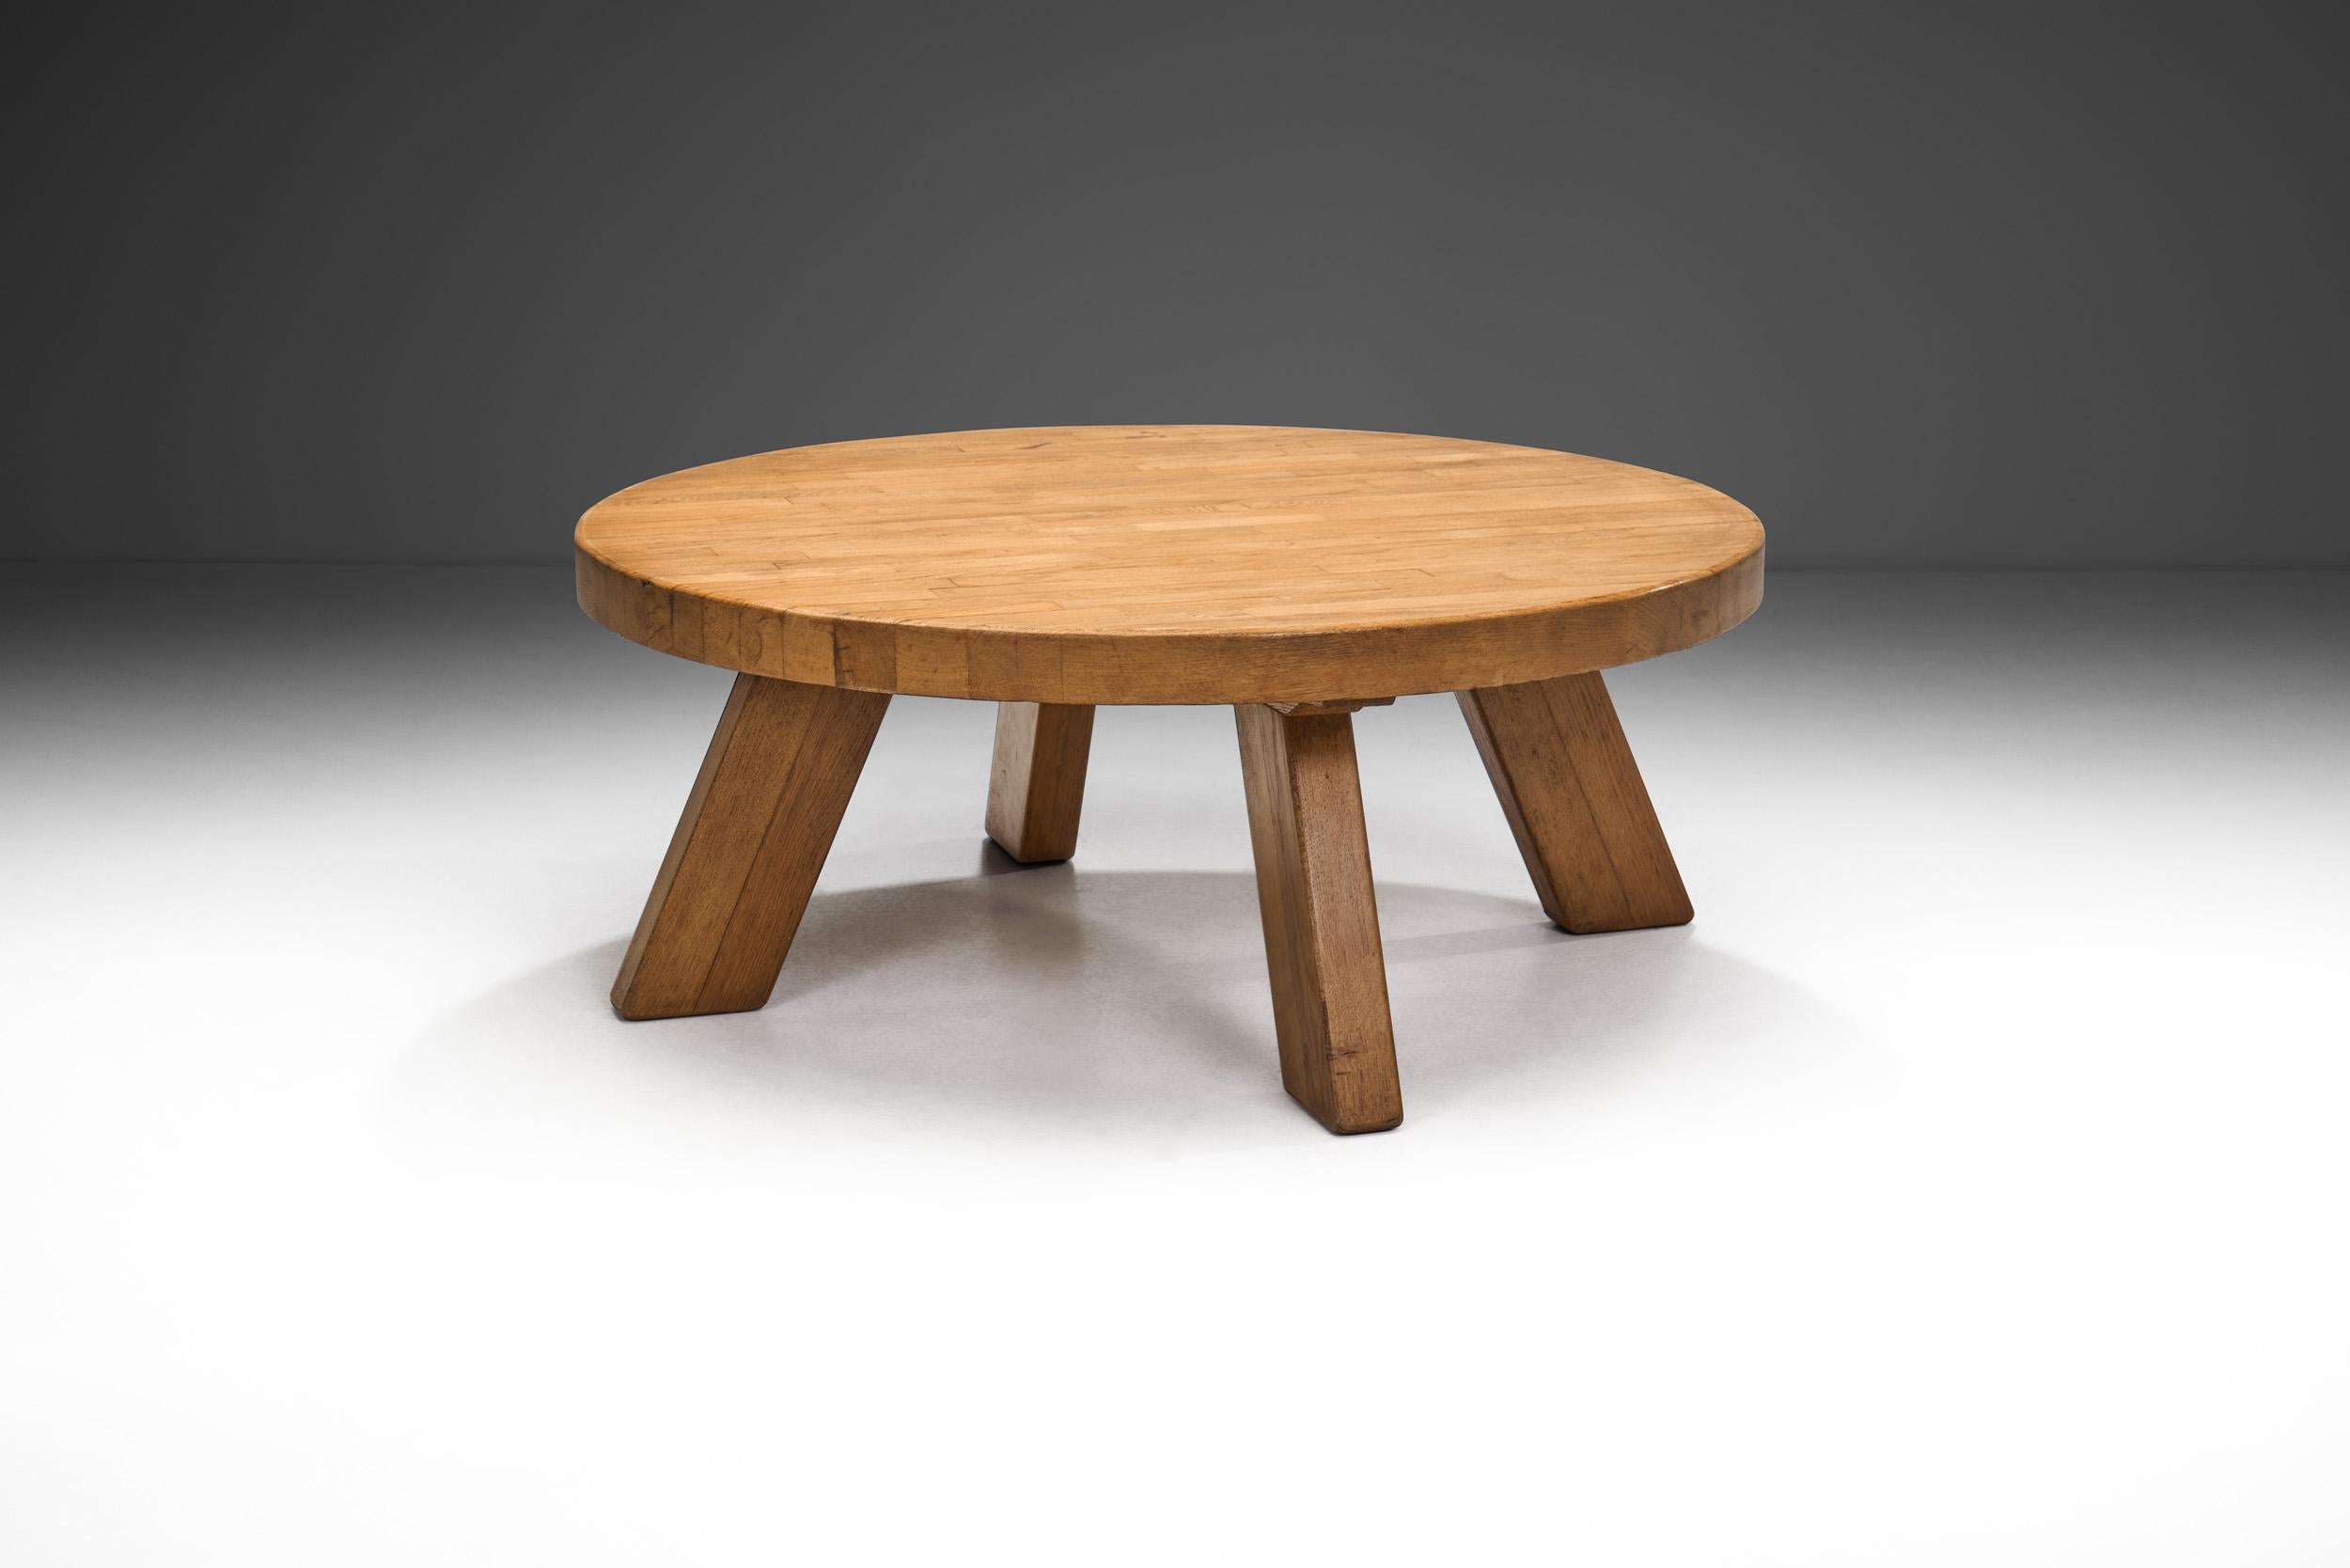 Late 20th Century Solid Oak Round Brutalist Coffee Table, The Netherlands 1970s